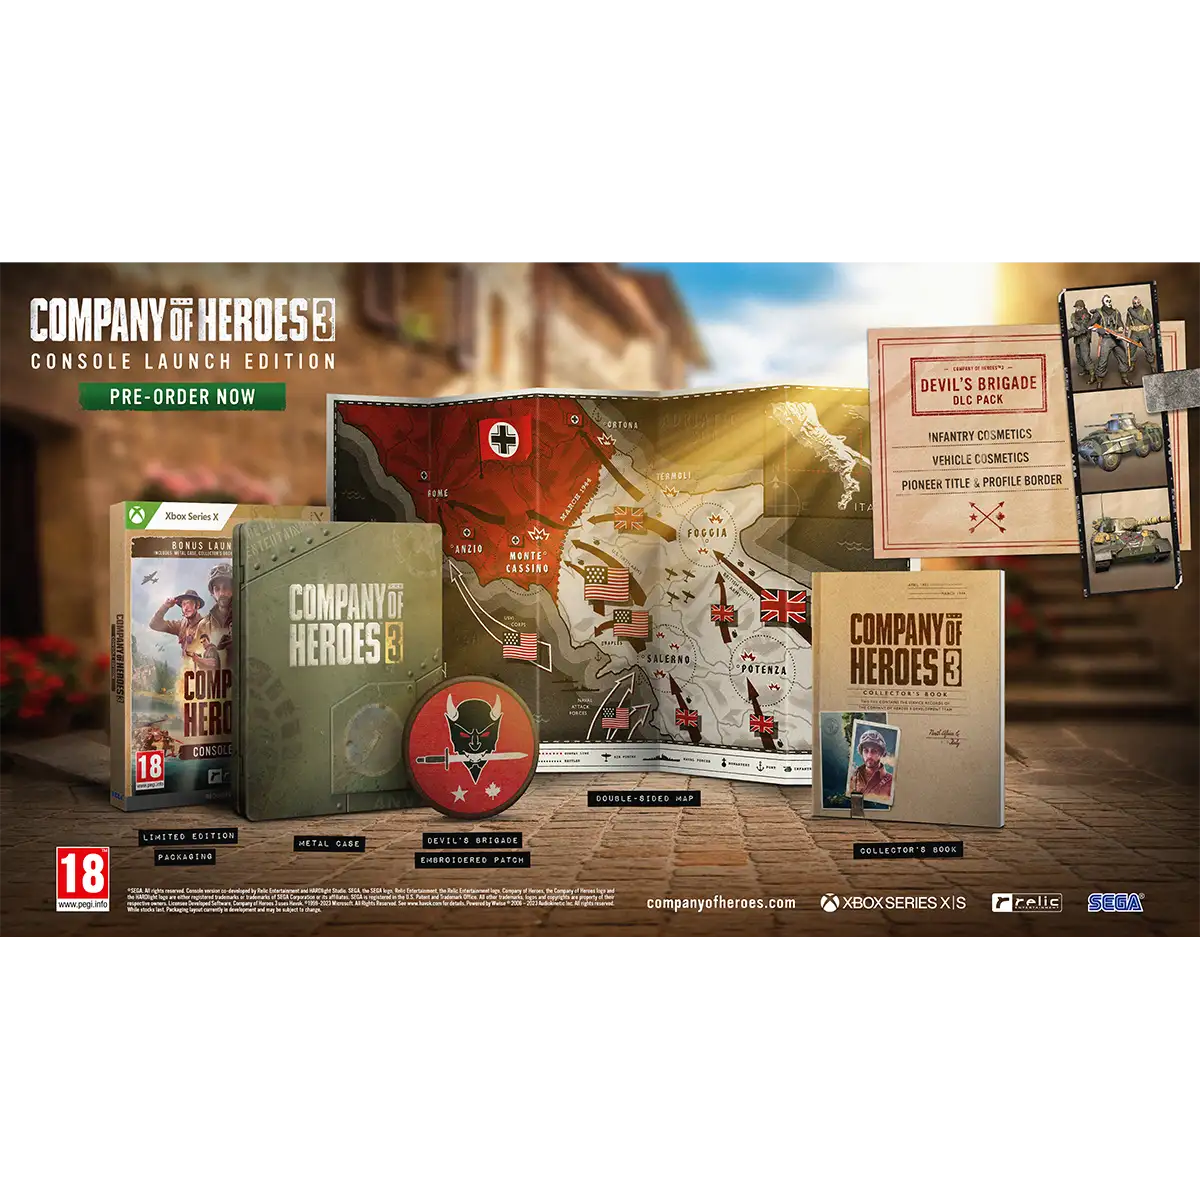 Company of Heroes 3 Launch Edition (Metal Case) (Xbox Series X) Image 3